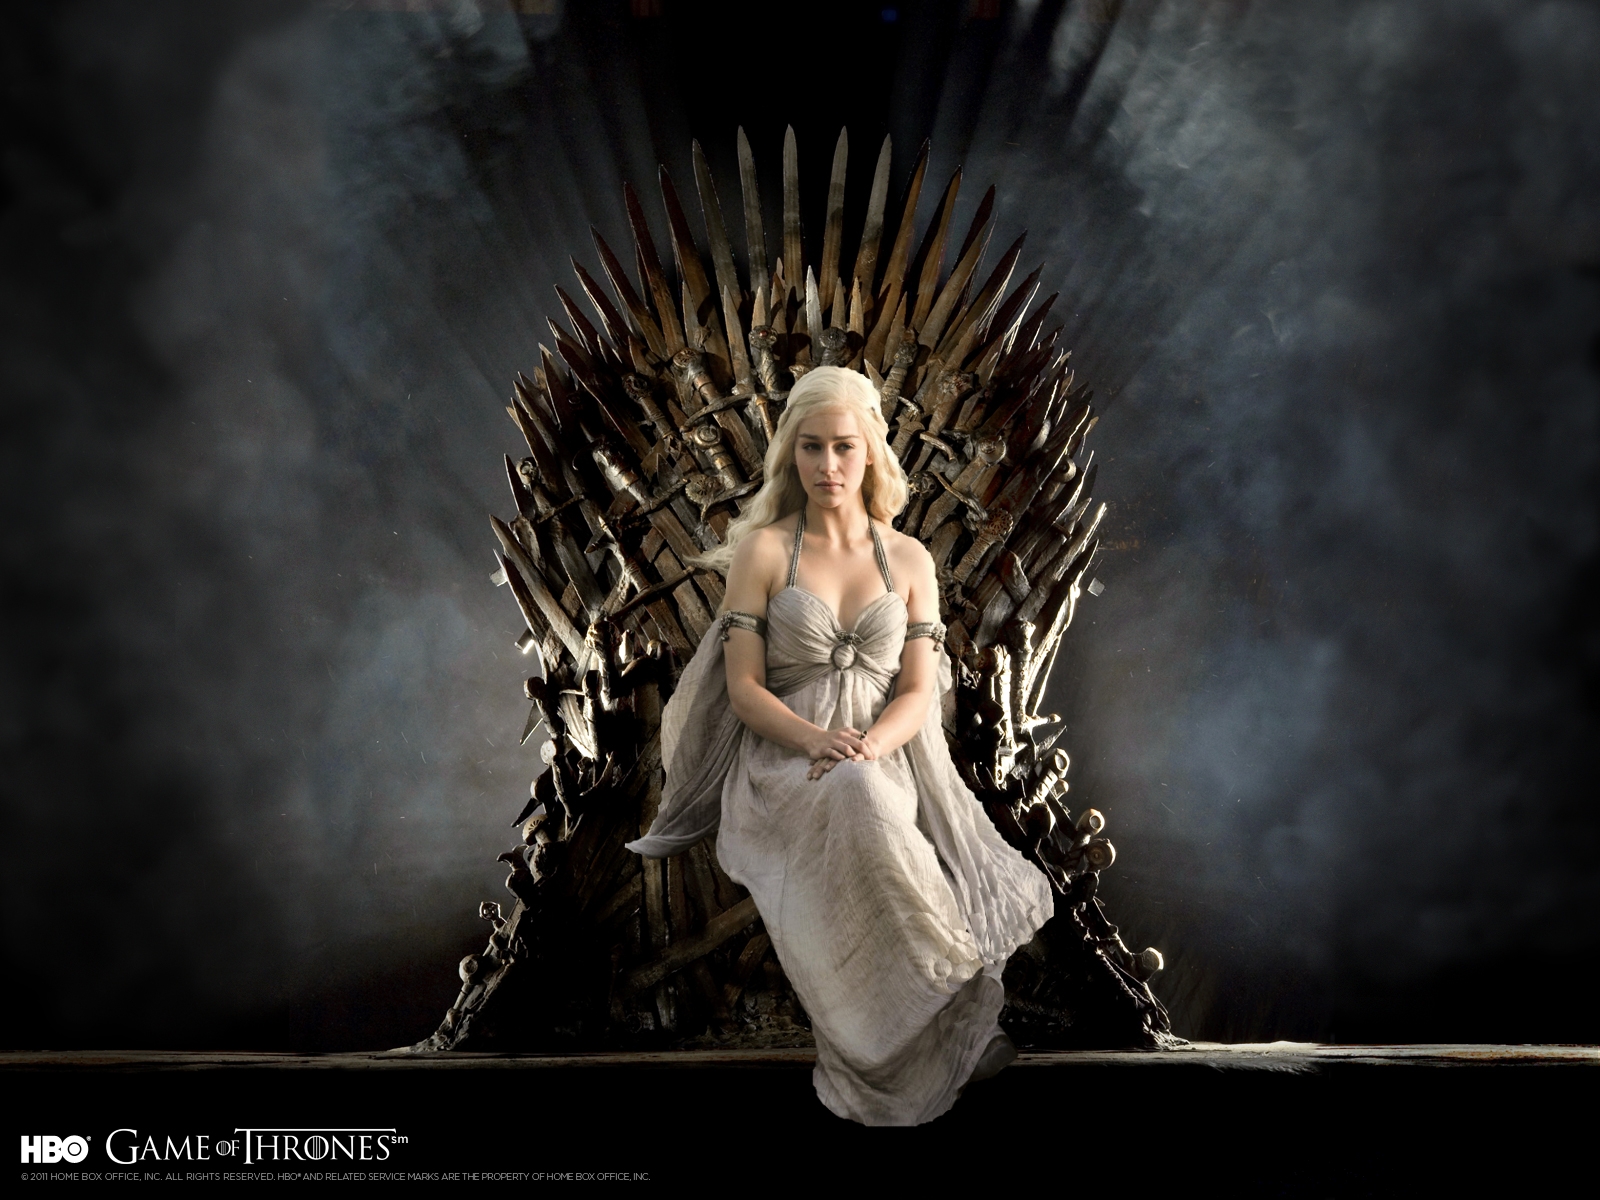 Daenerys Targarian & The Iron Throne from Game of Thrones